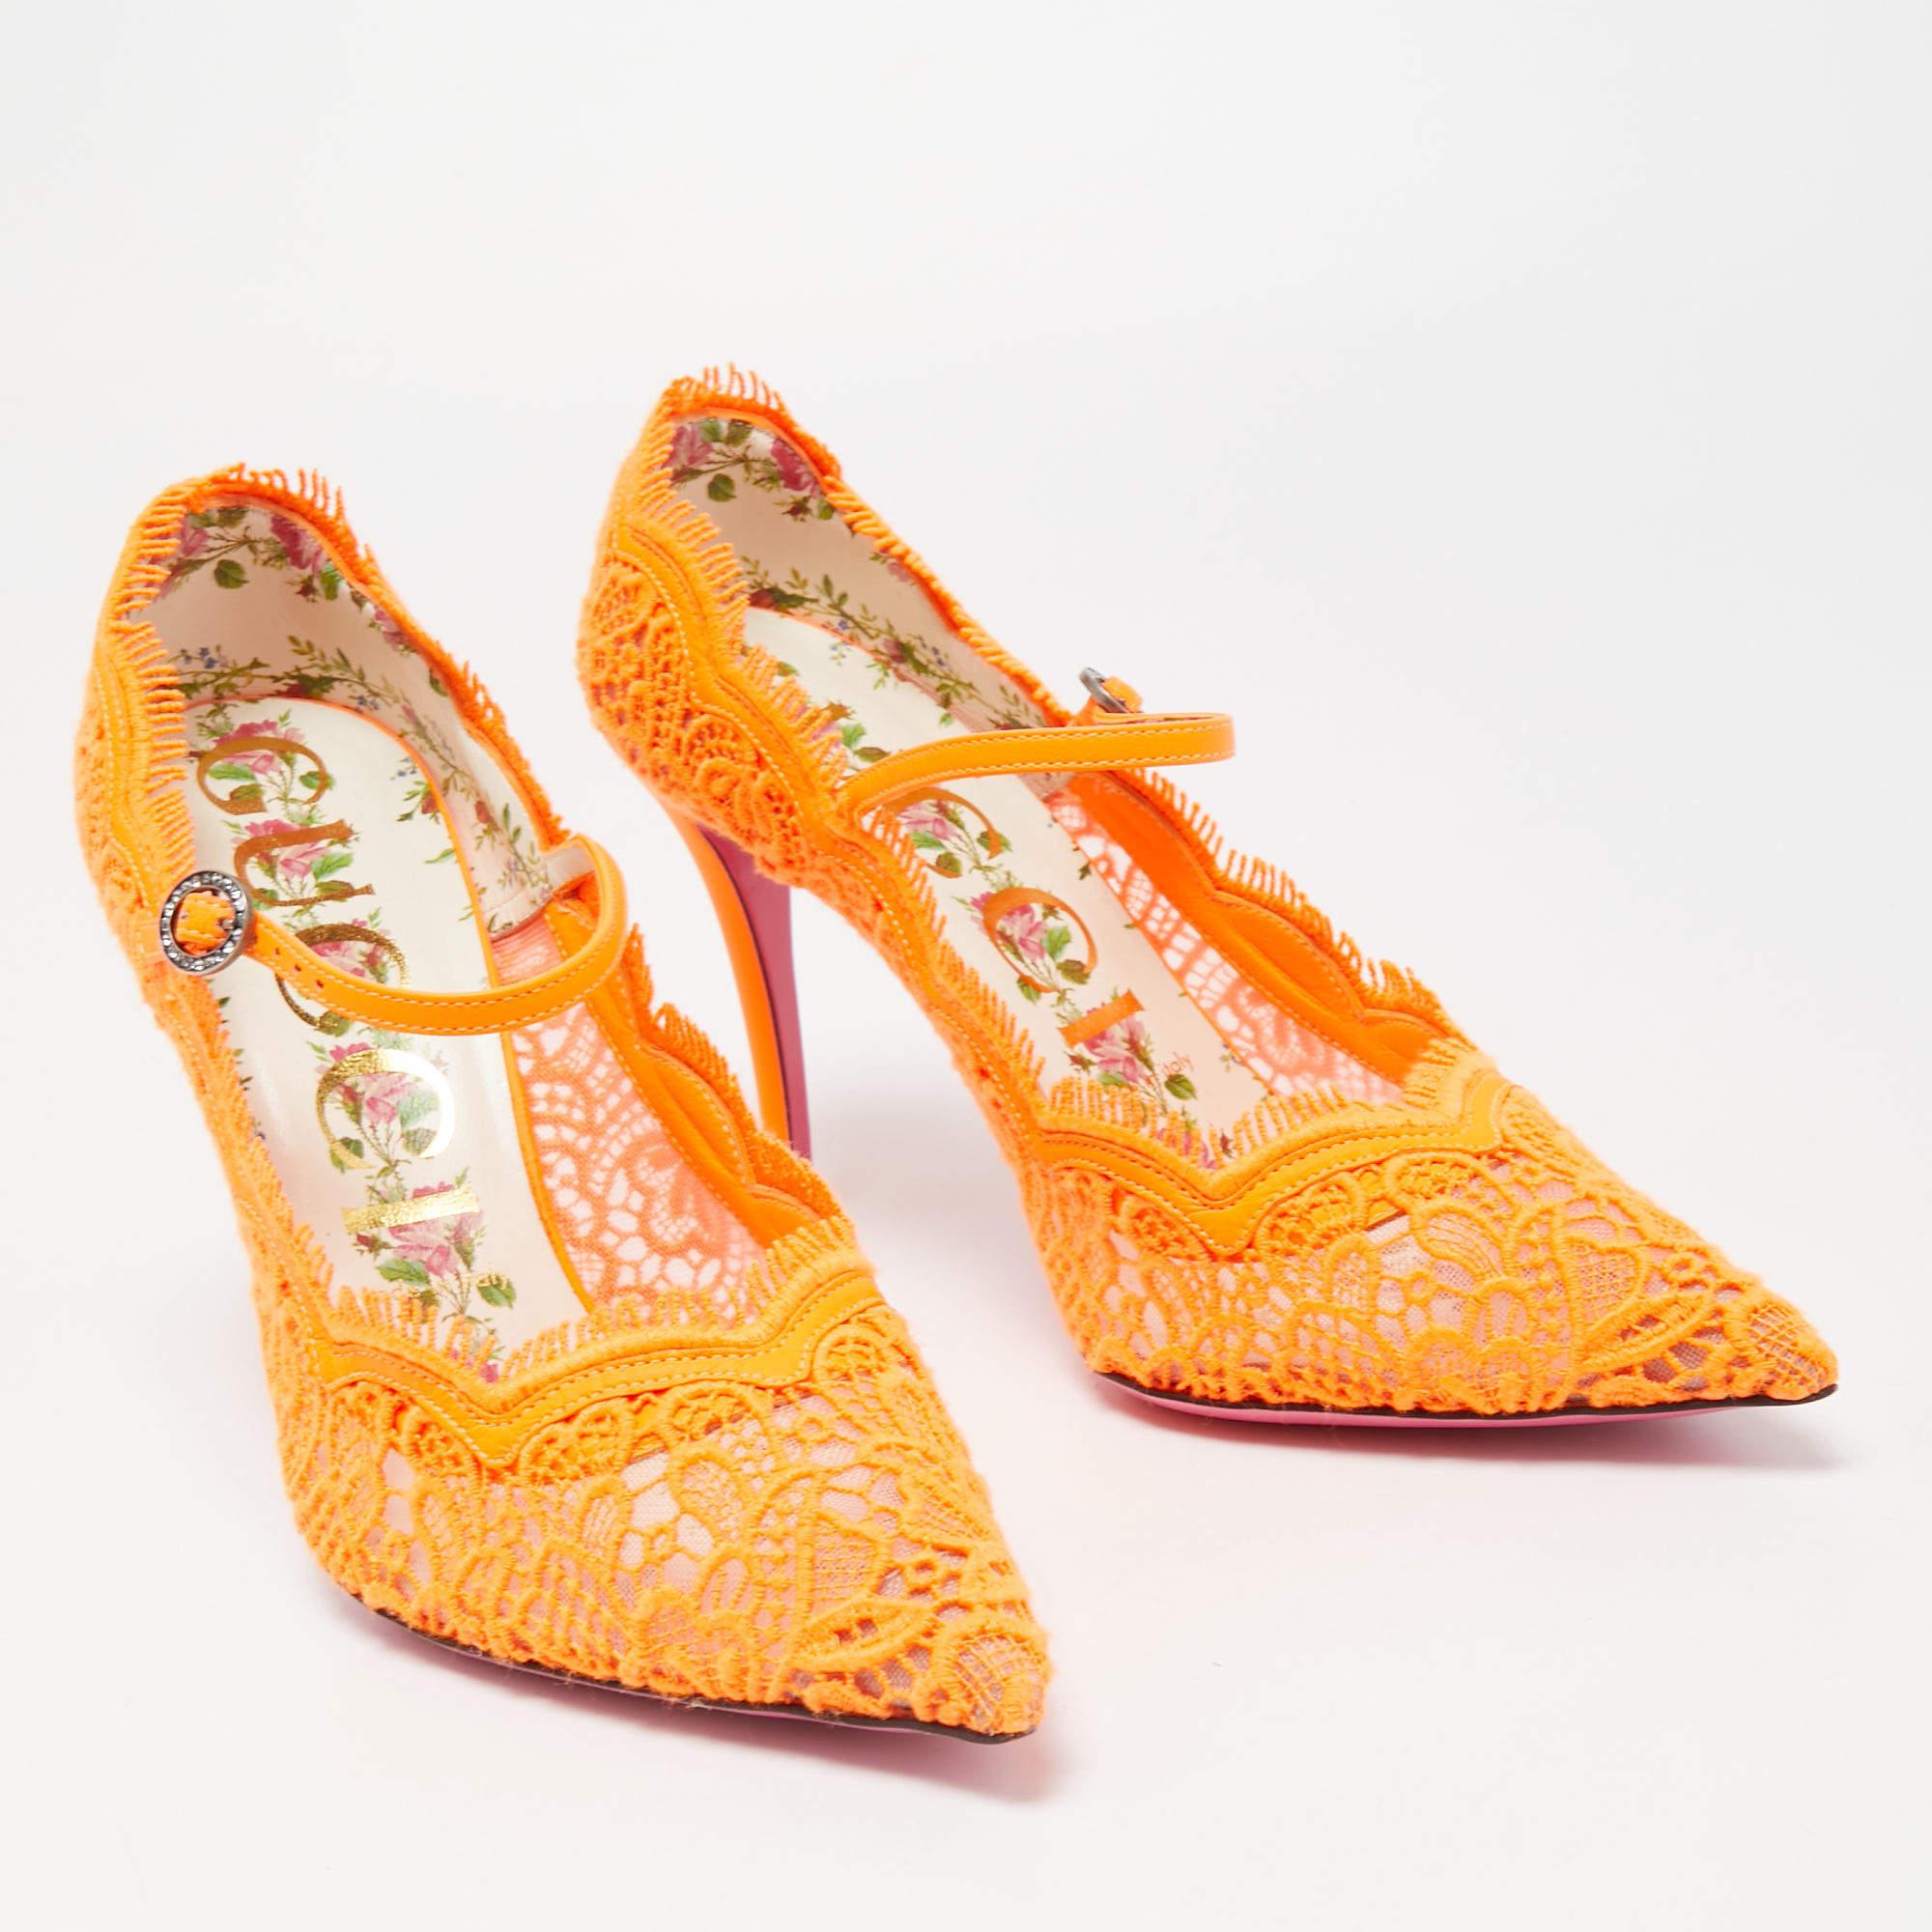 Gucci Orange Fabric and Leather Virginia Mary Jane Pumps Size 38 1